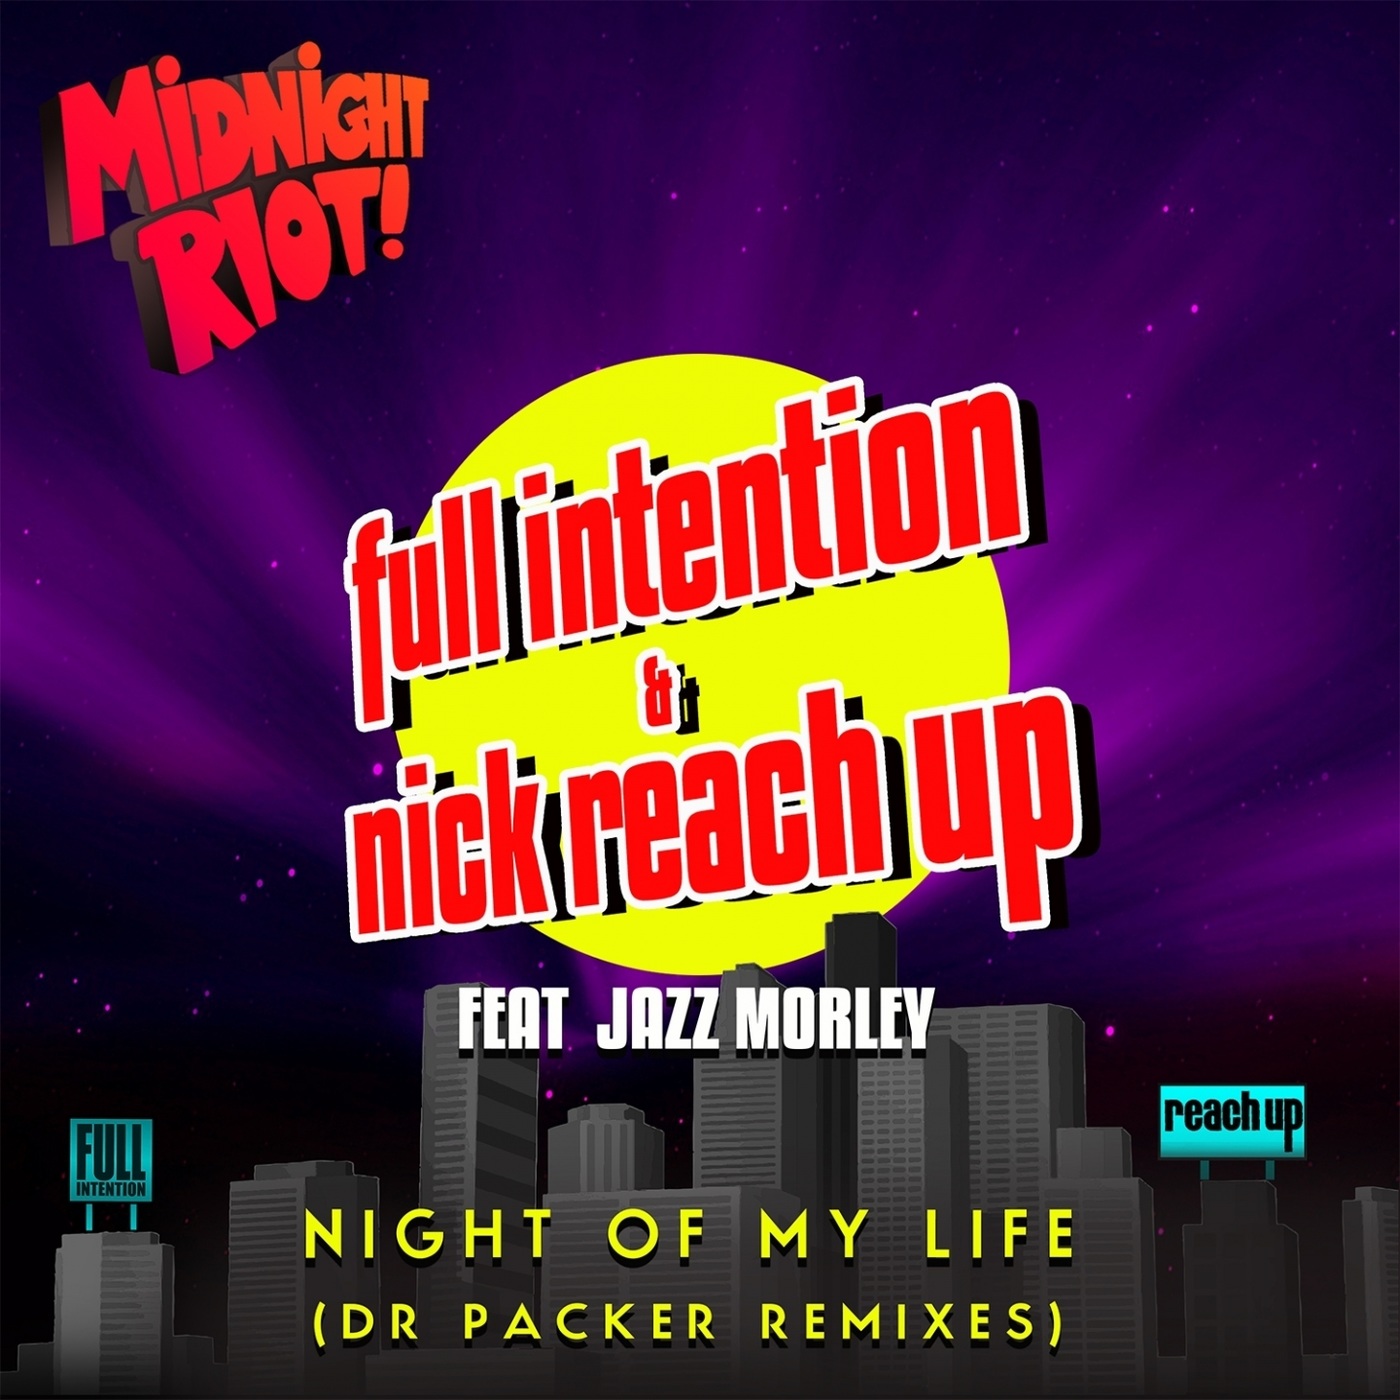 Full Intention - Night of My Life (Dr Packer Remixes) / Midnight Riot